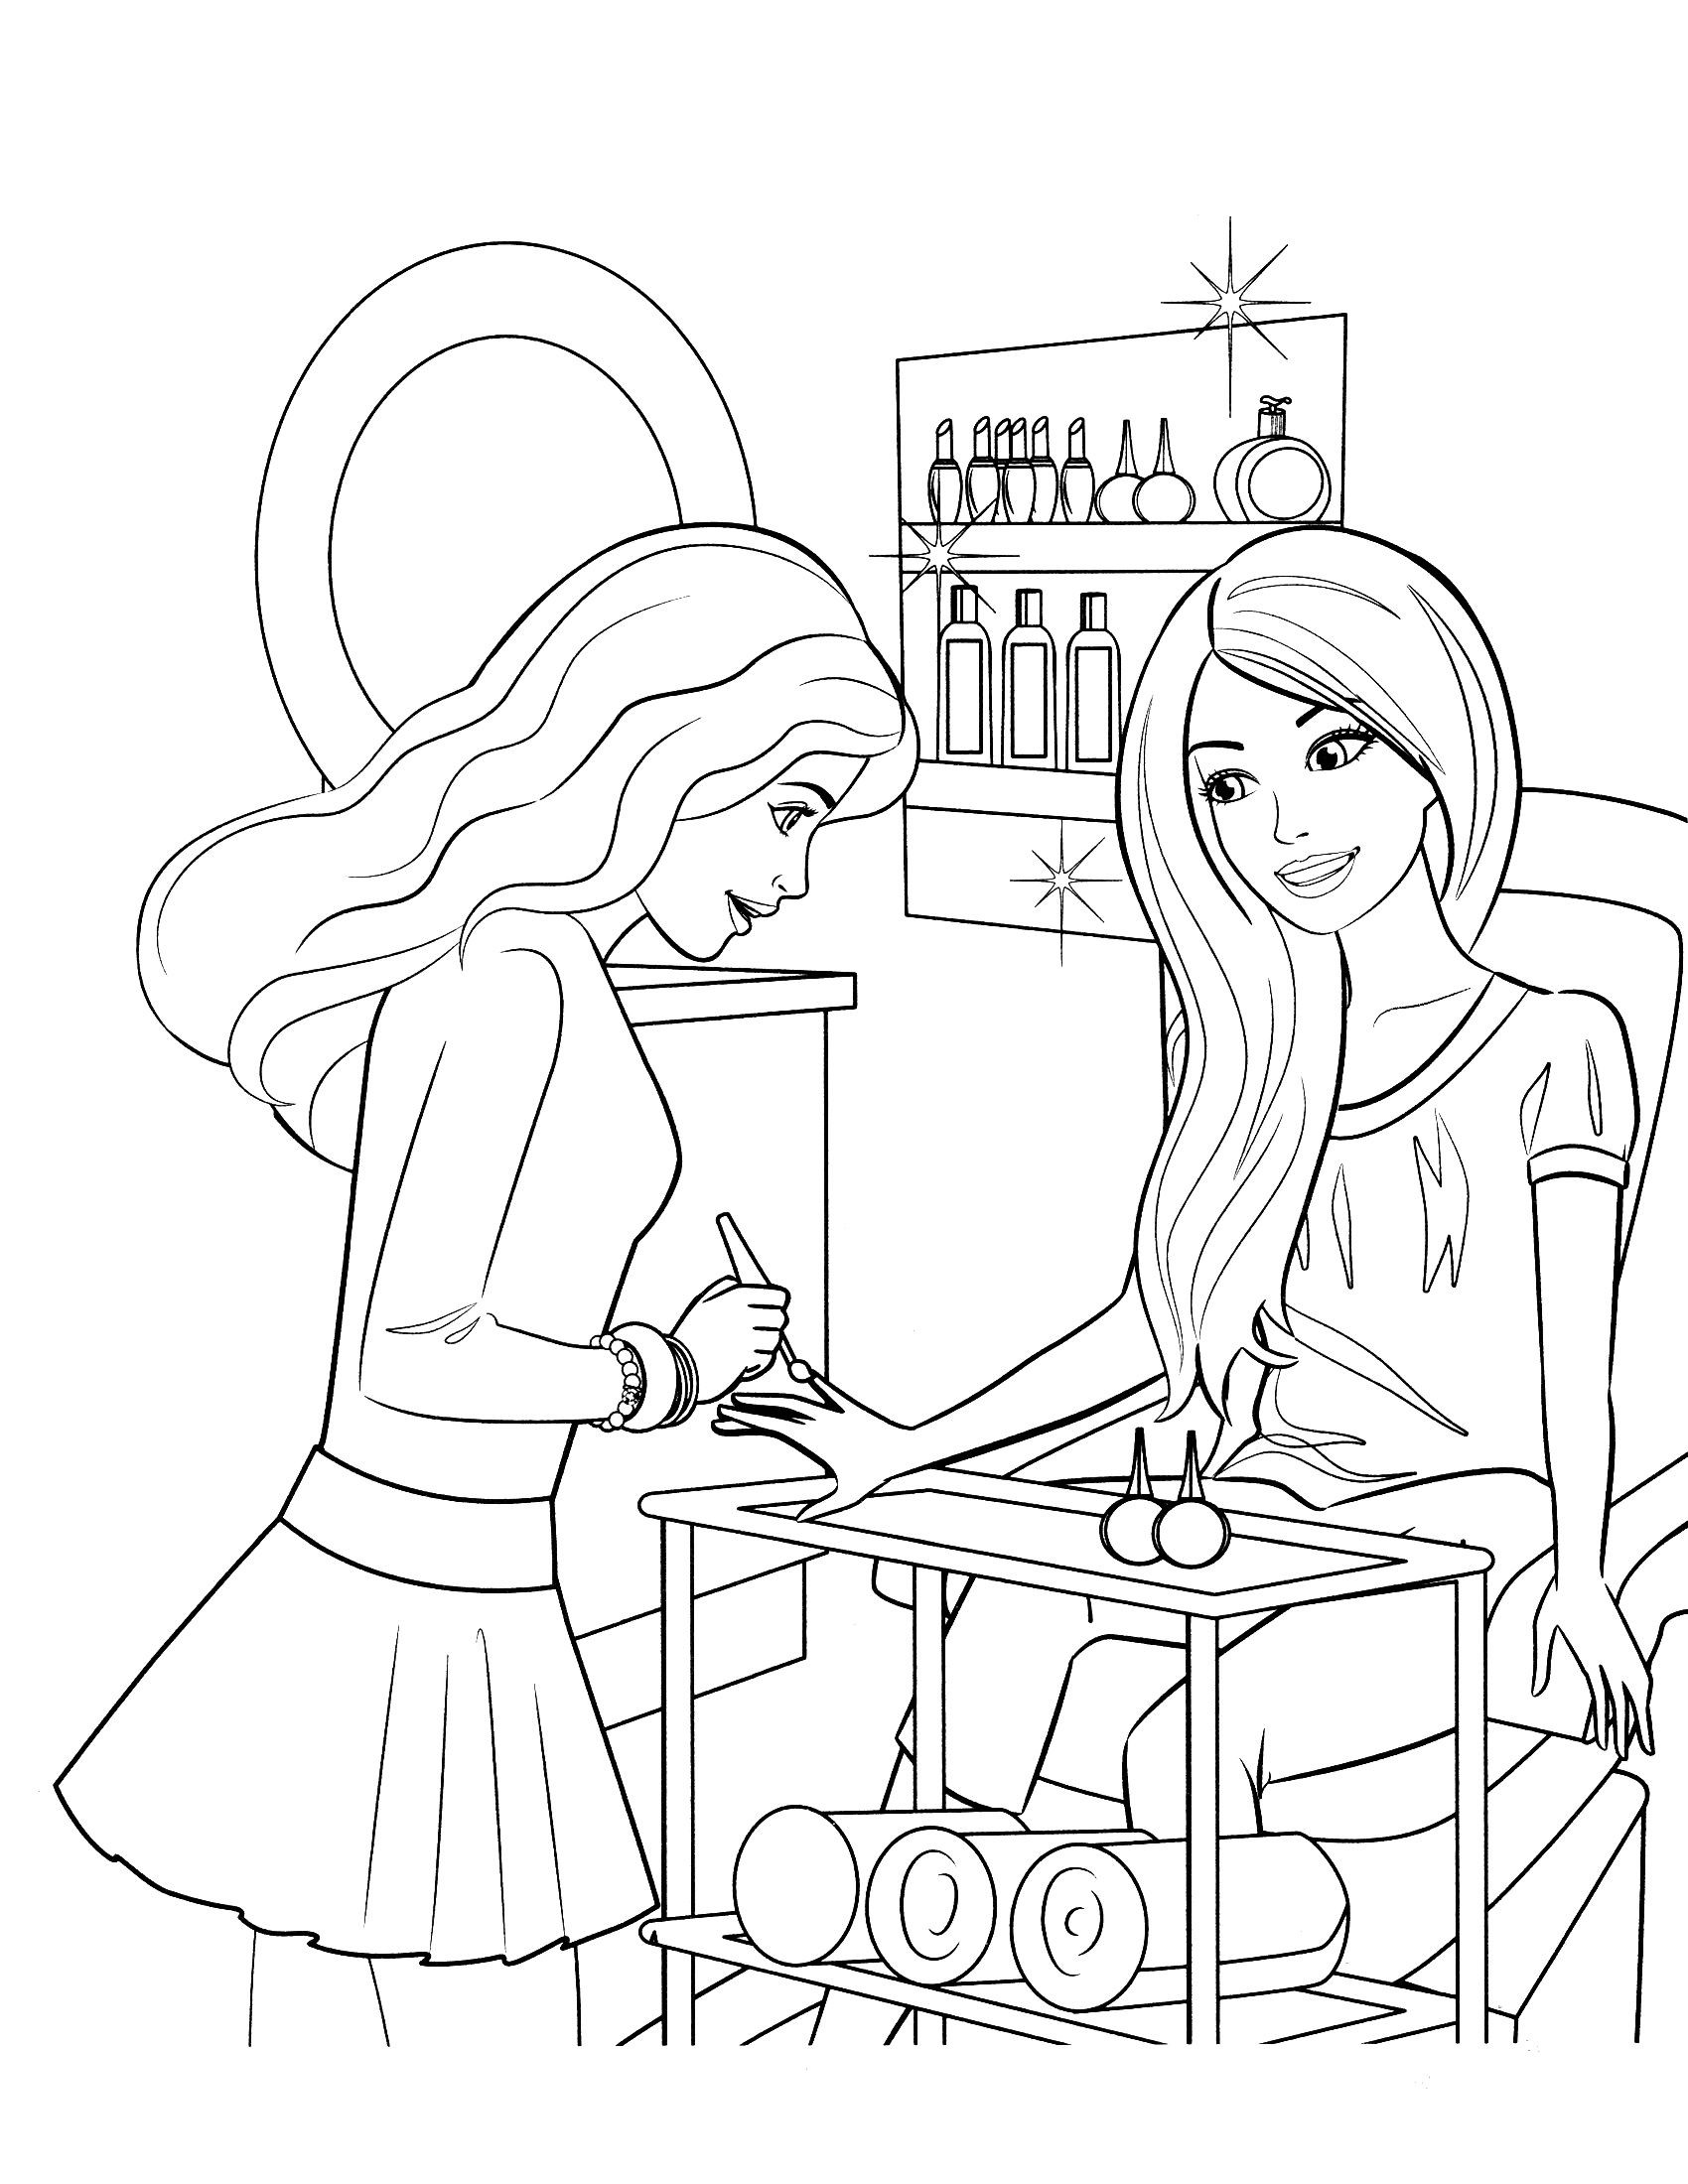 Coloring Pages For Kids Barbie
 free printable barbie coloring pages for kids barbie